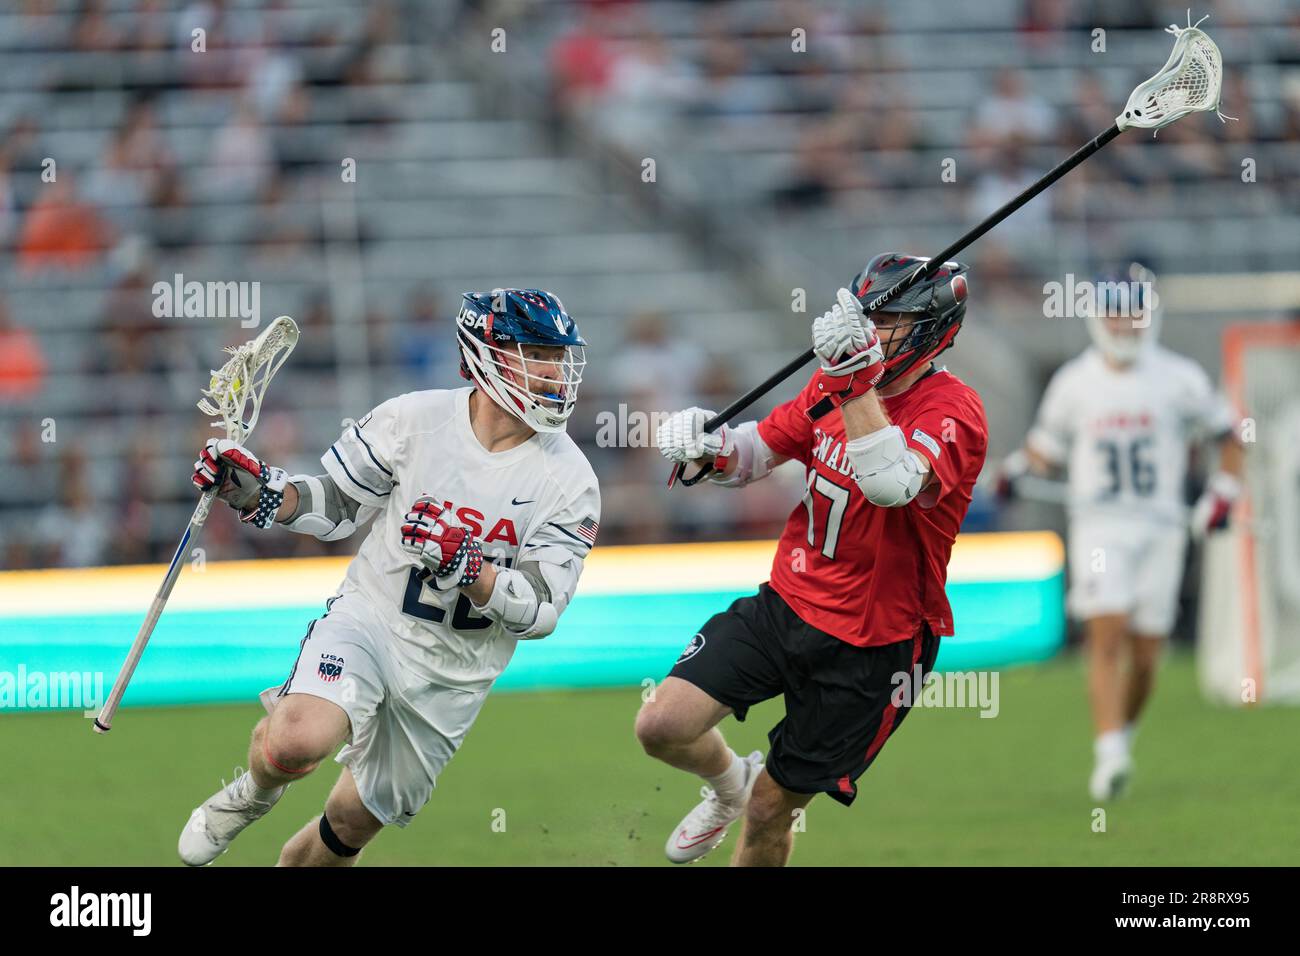 San Diego, USA. 21st June, 2023. Tom Schreiber (26) controls the ball for USA at the World Lacrosse Men's Championship opening game USA vs Canada at Snapdragon Stadium. Credit: Ben Nichols/Alamy Live News Stock Photo